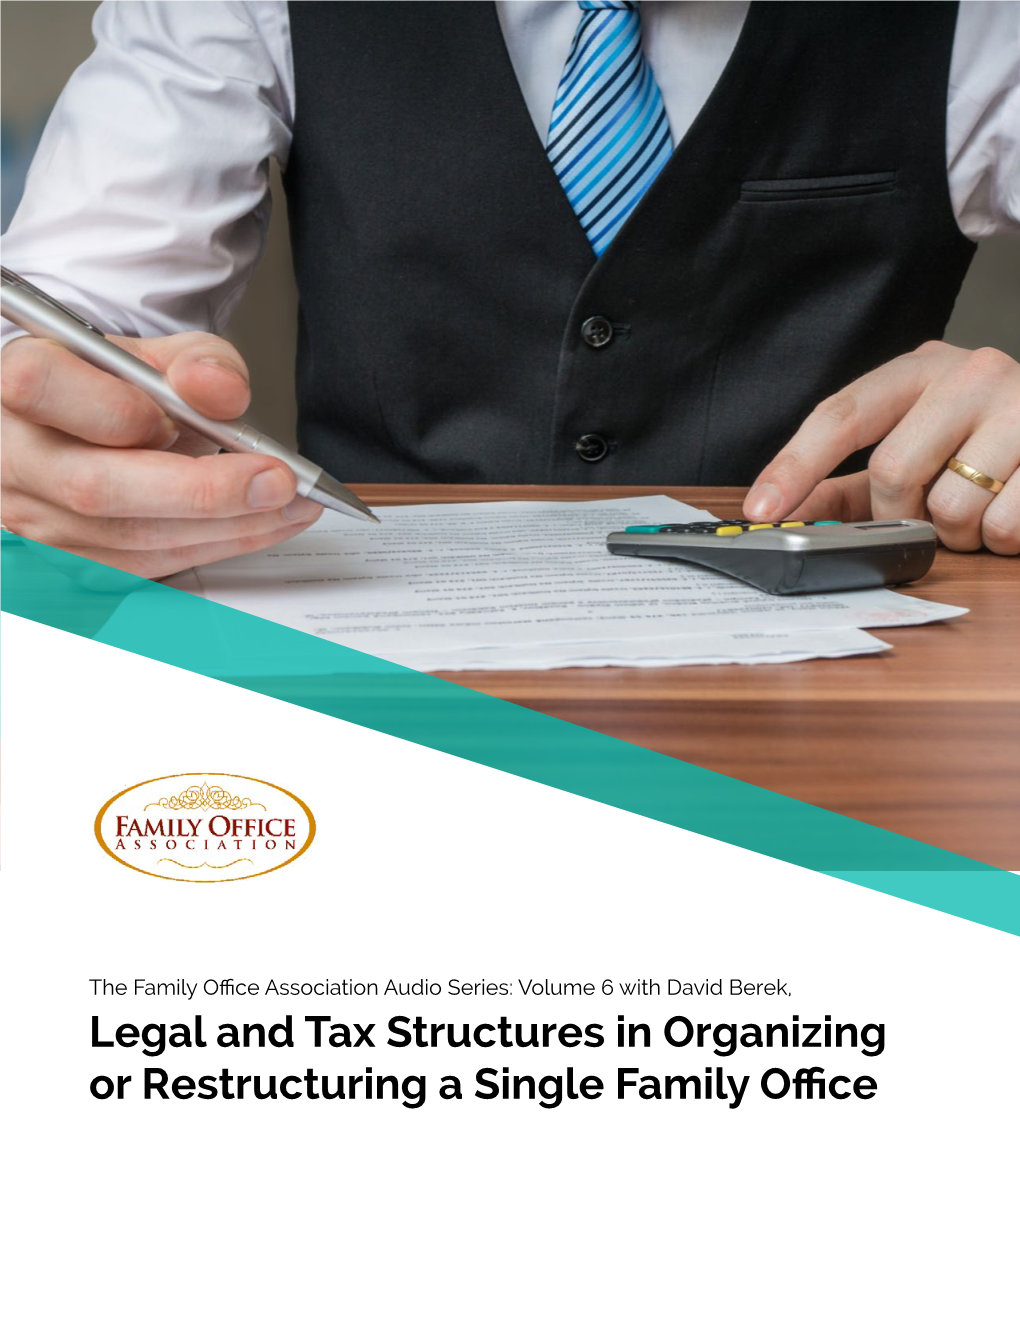 Legal and Tax Structures in Organizing Or Restructuring A